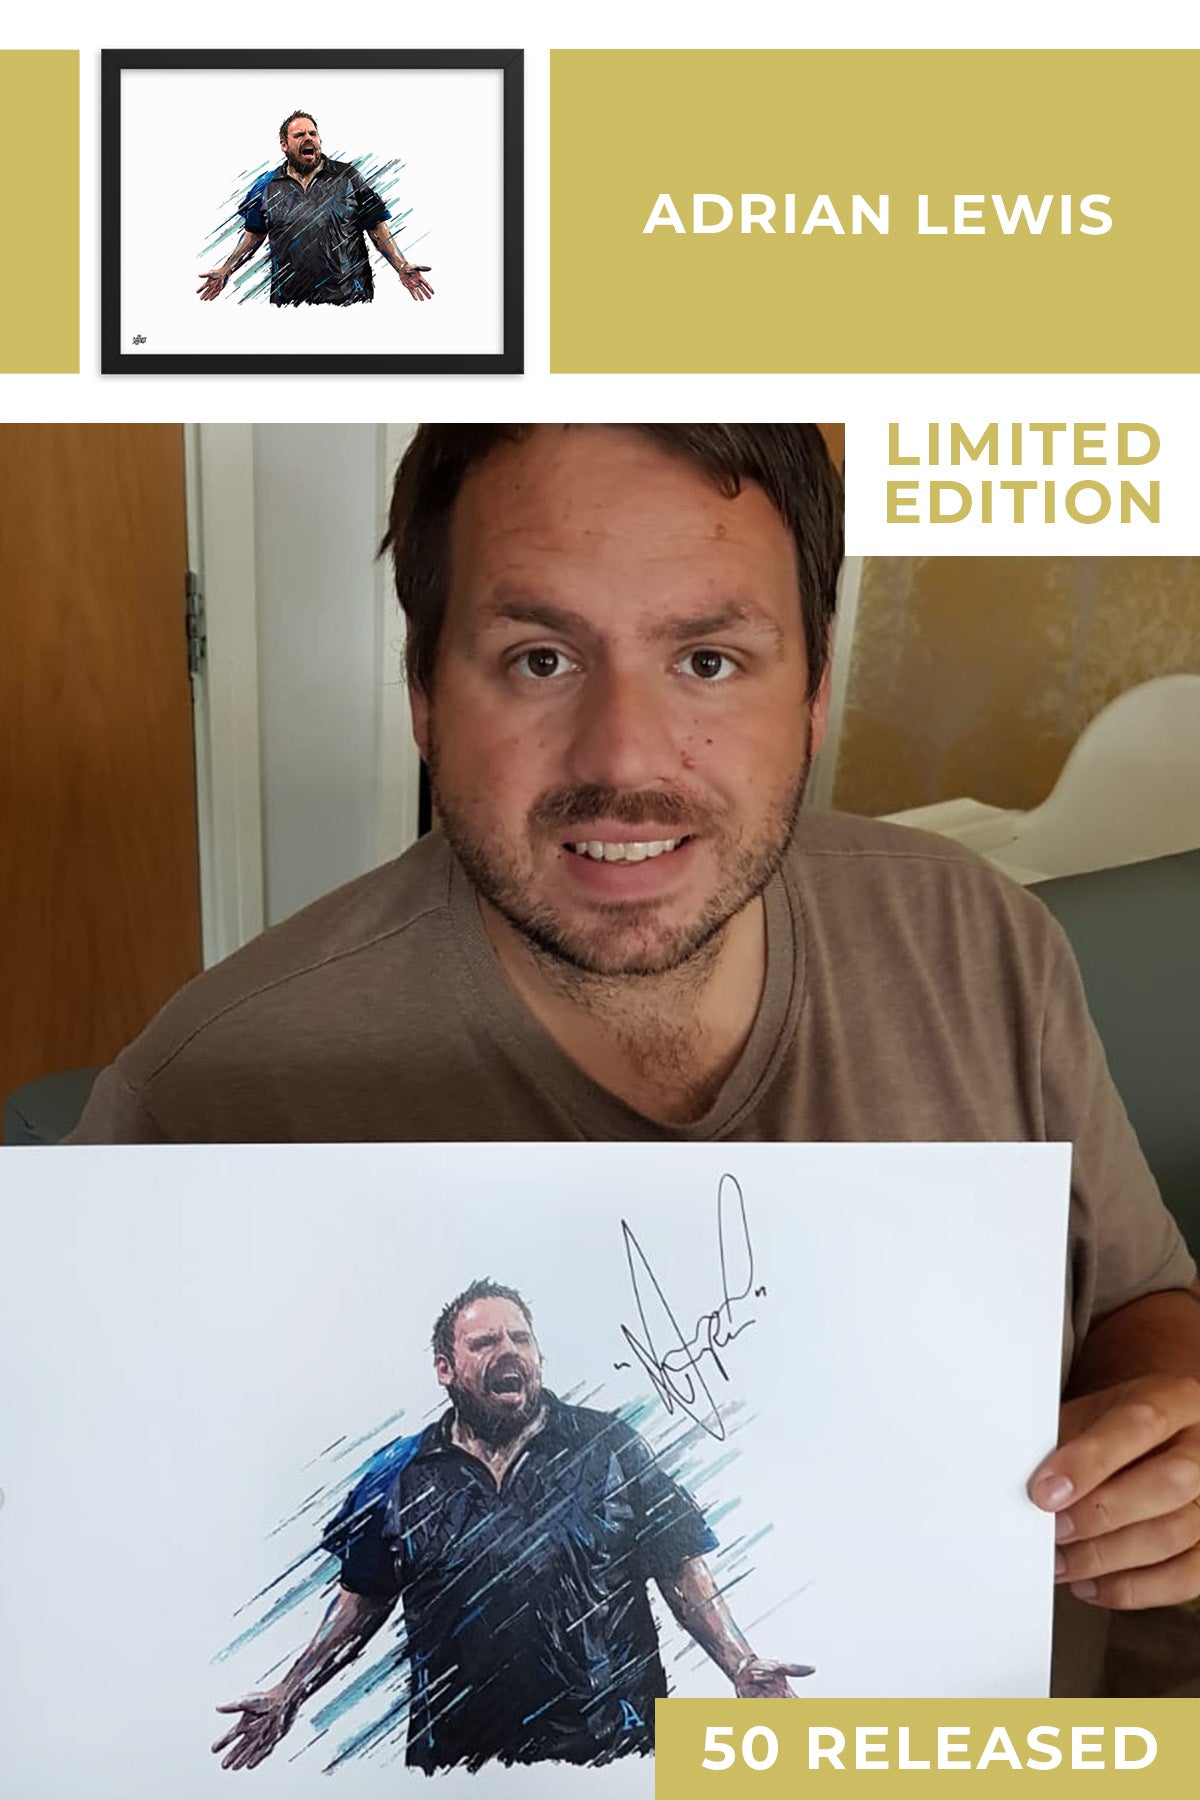 Adrian Lewis Limited Edition Signed Art Print - The Dartist